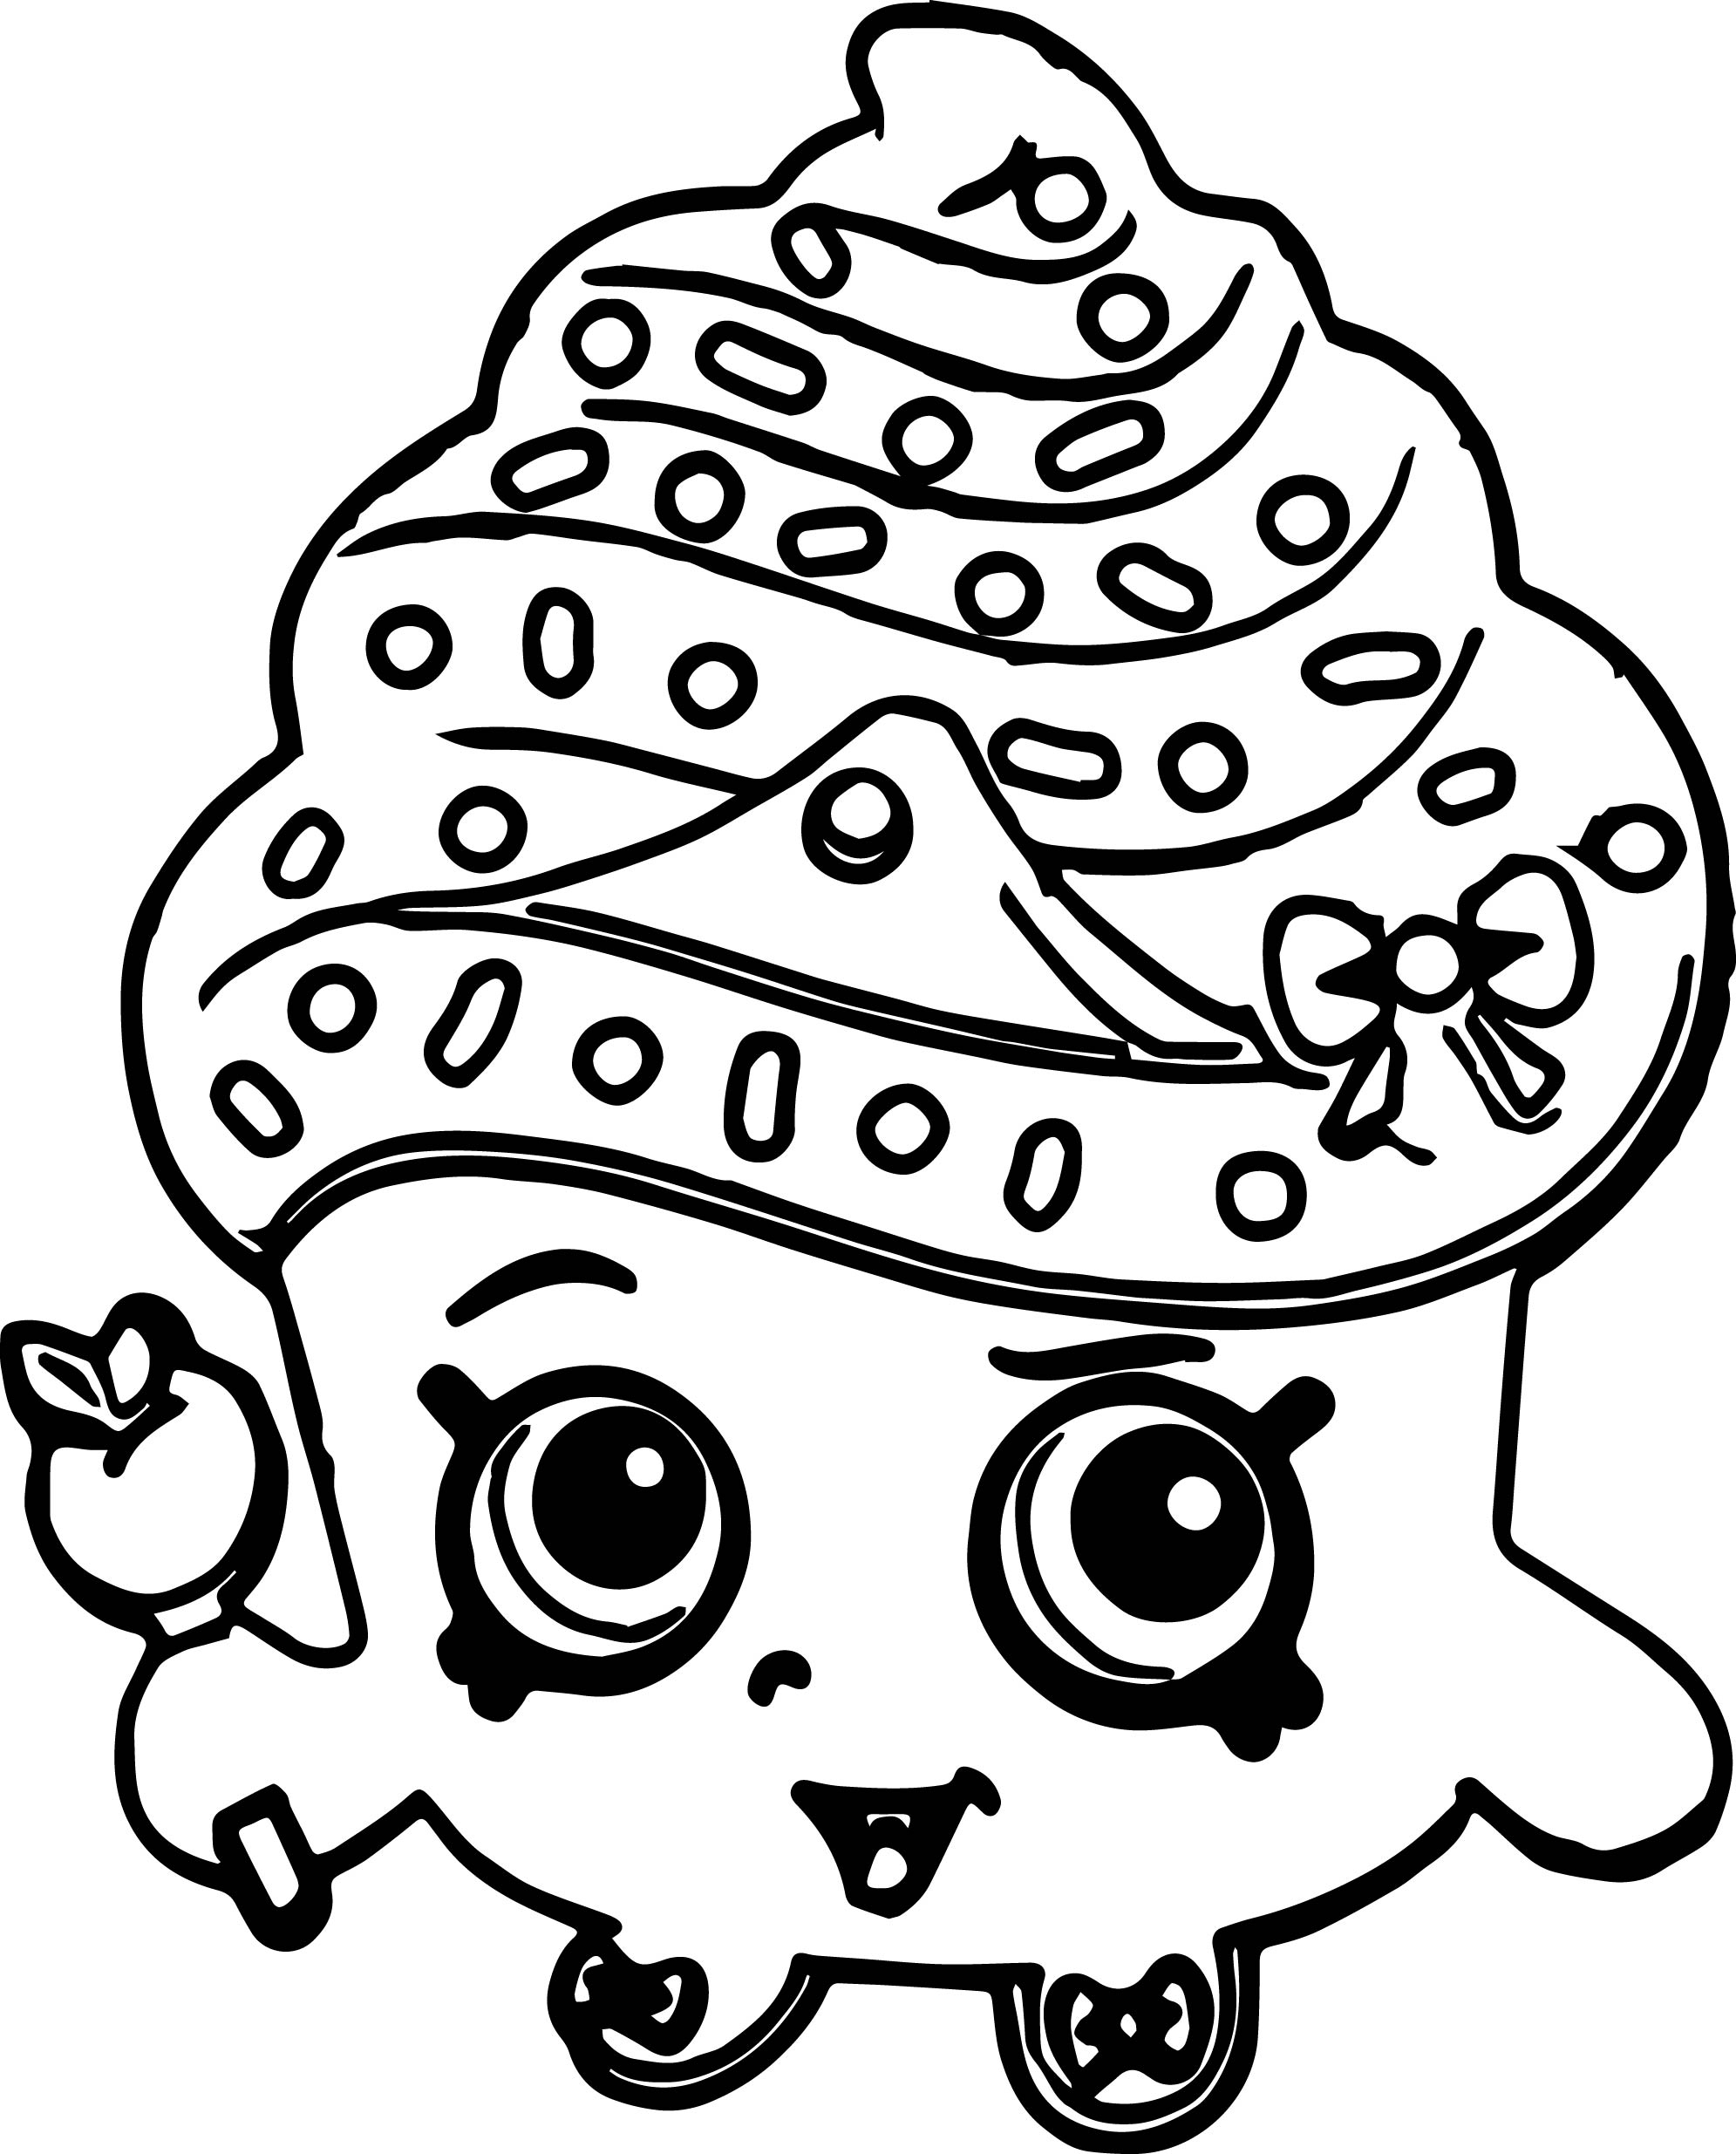 shopkins-printable-coloring-pages-customize-and-print